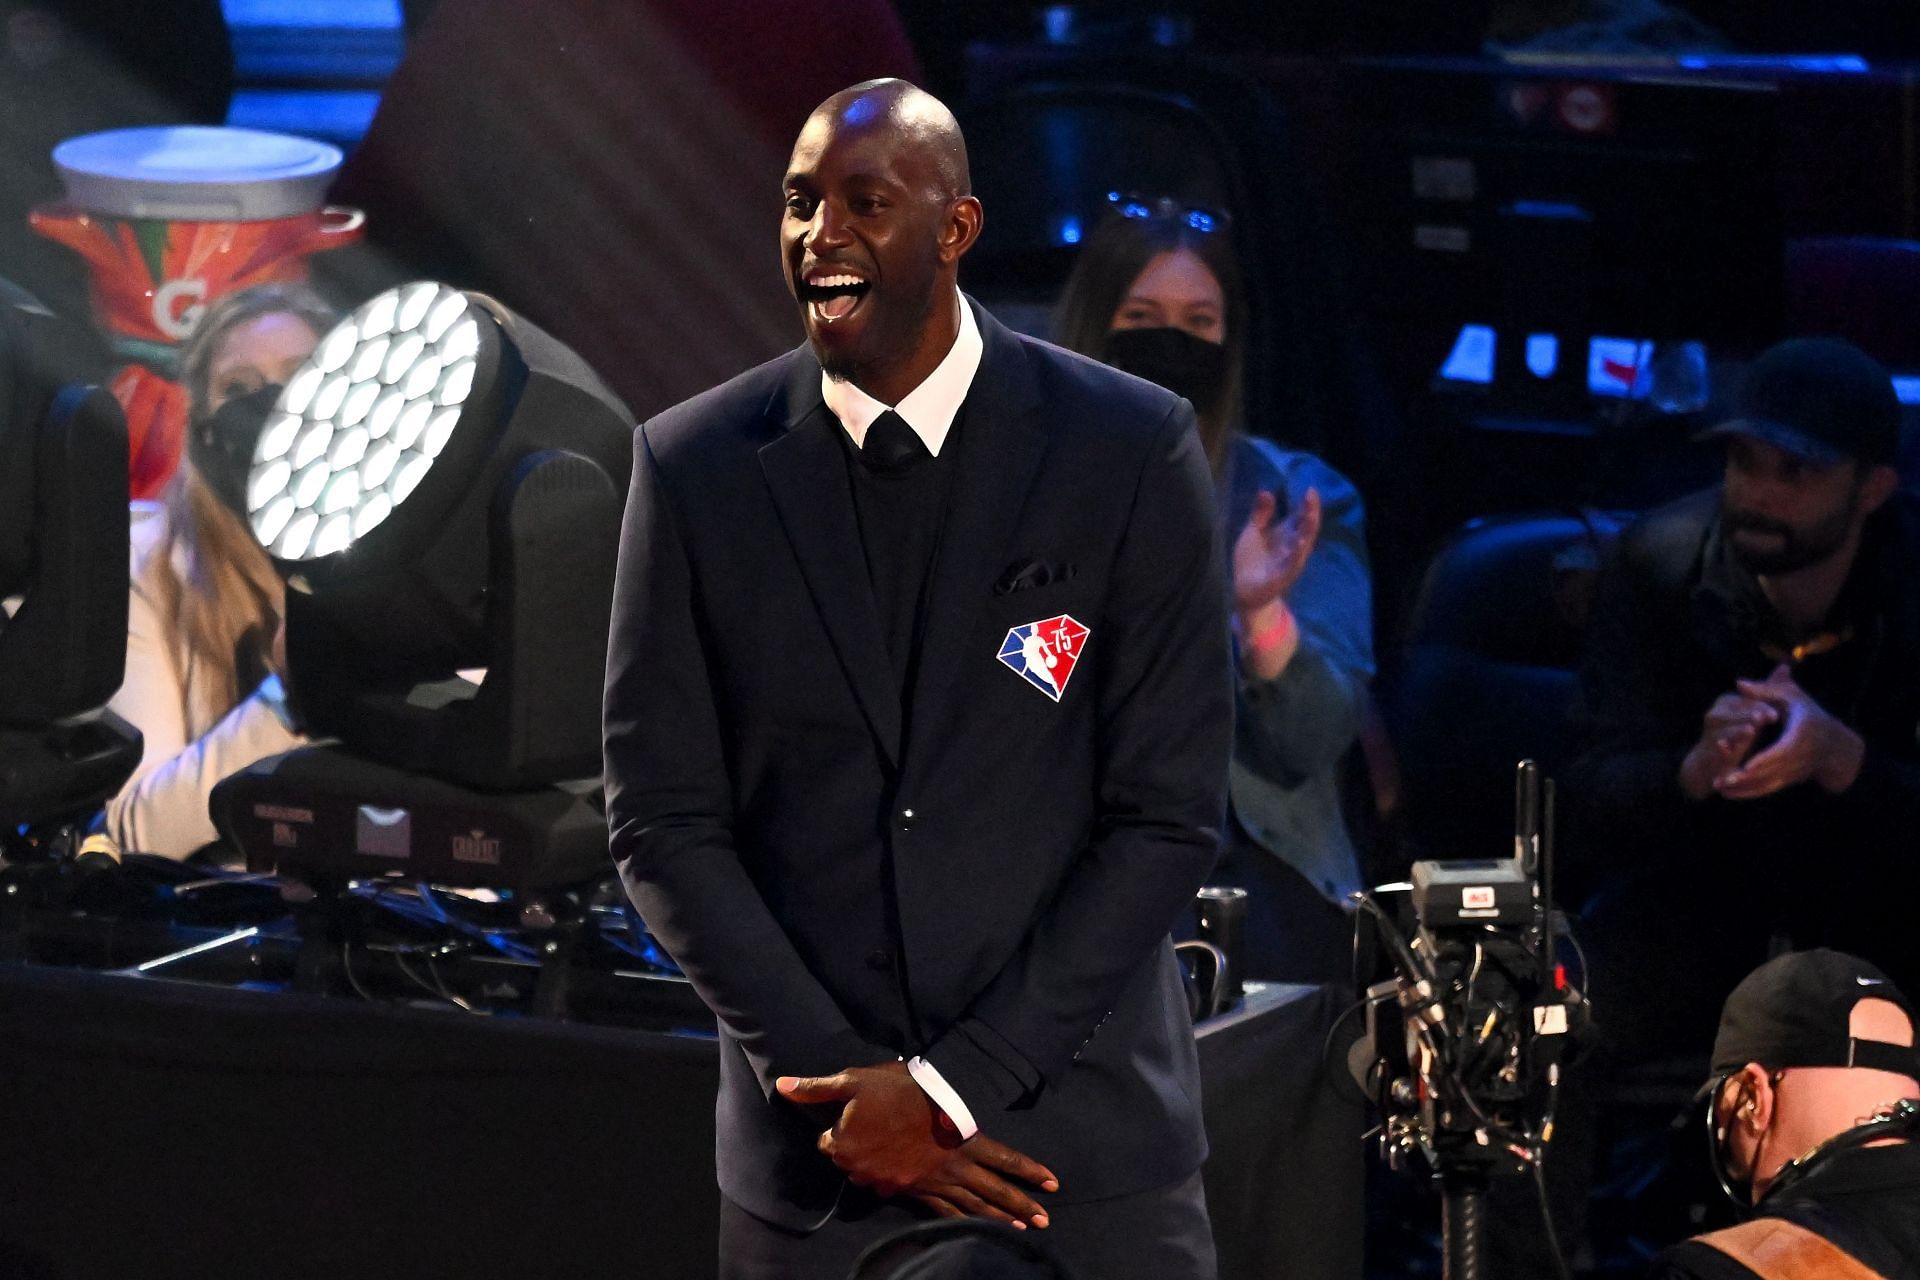 Kevin Garnett has allegedly held a grudge against Ray Allen for quitting the Boston Celtics to join the Miami Heat